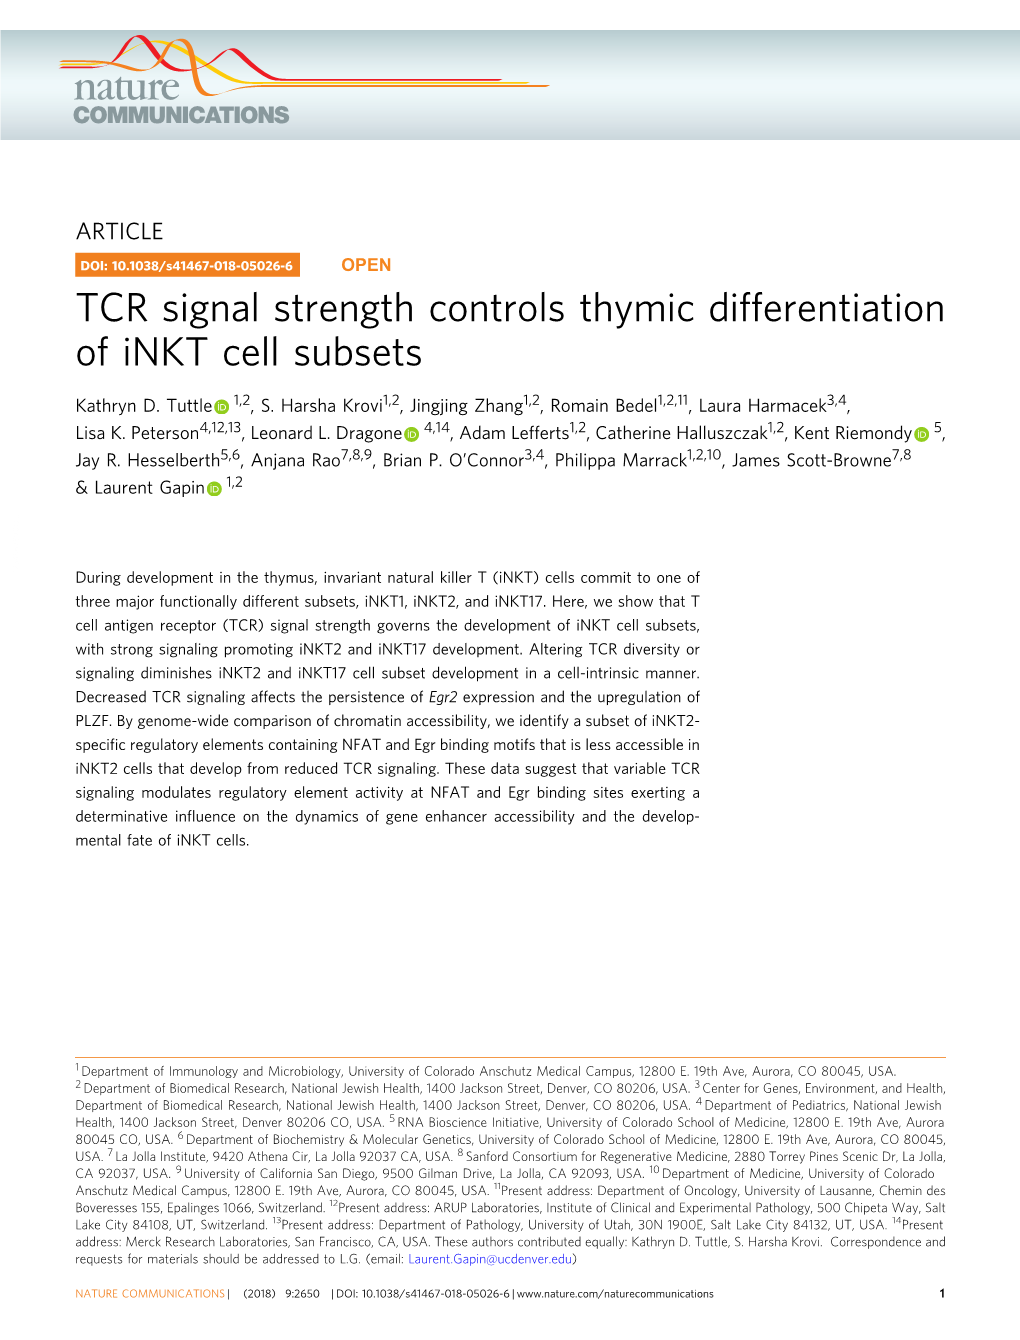 TCR Signal Strength Controls Thymic Differentiation of Inkt Cell Subsets